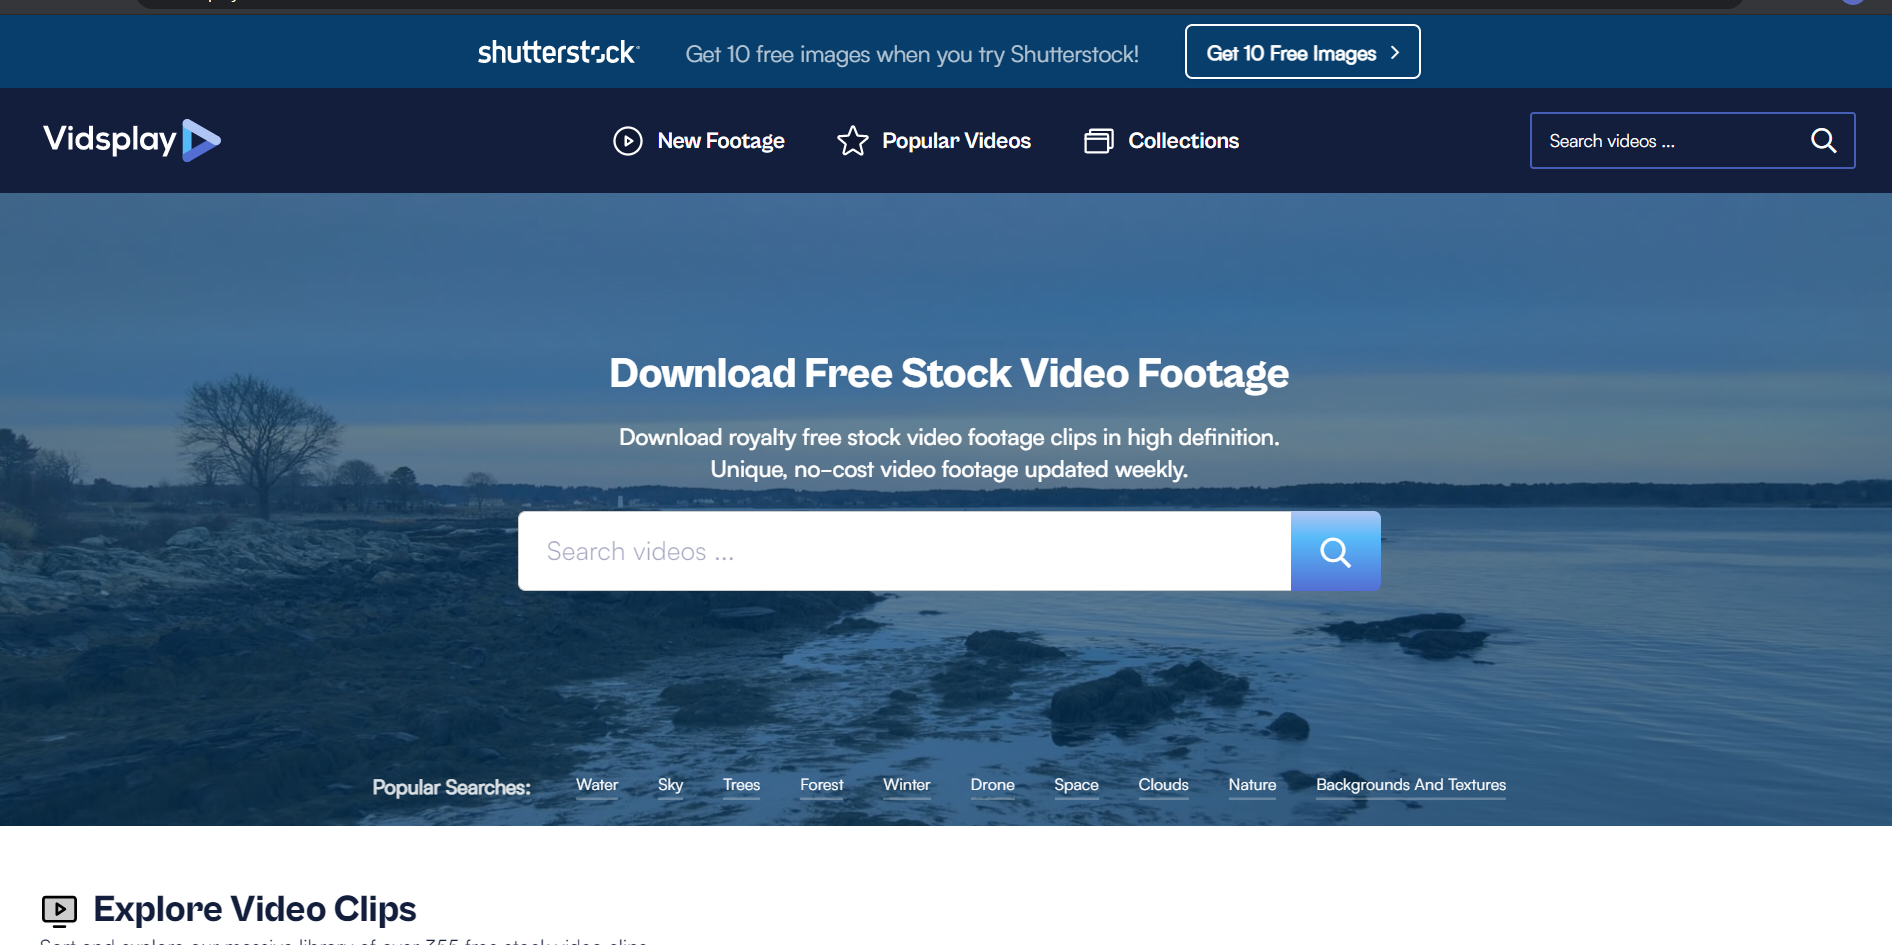 4k Videos, Download The BEST Free 4k Stock Video Footage & 4k HD Video Clips